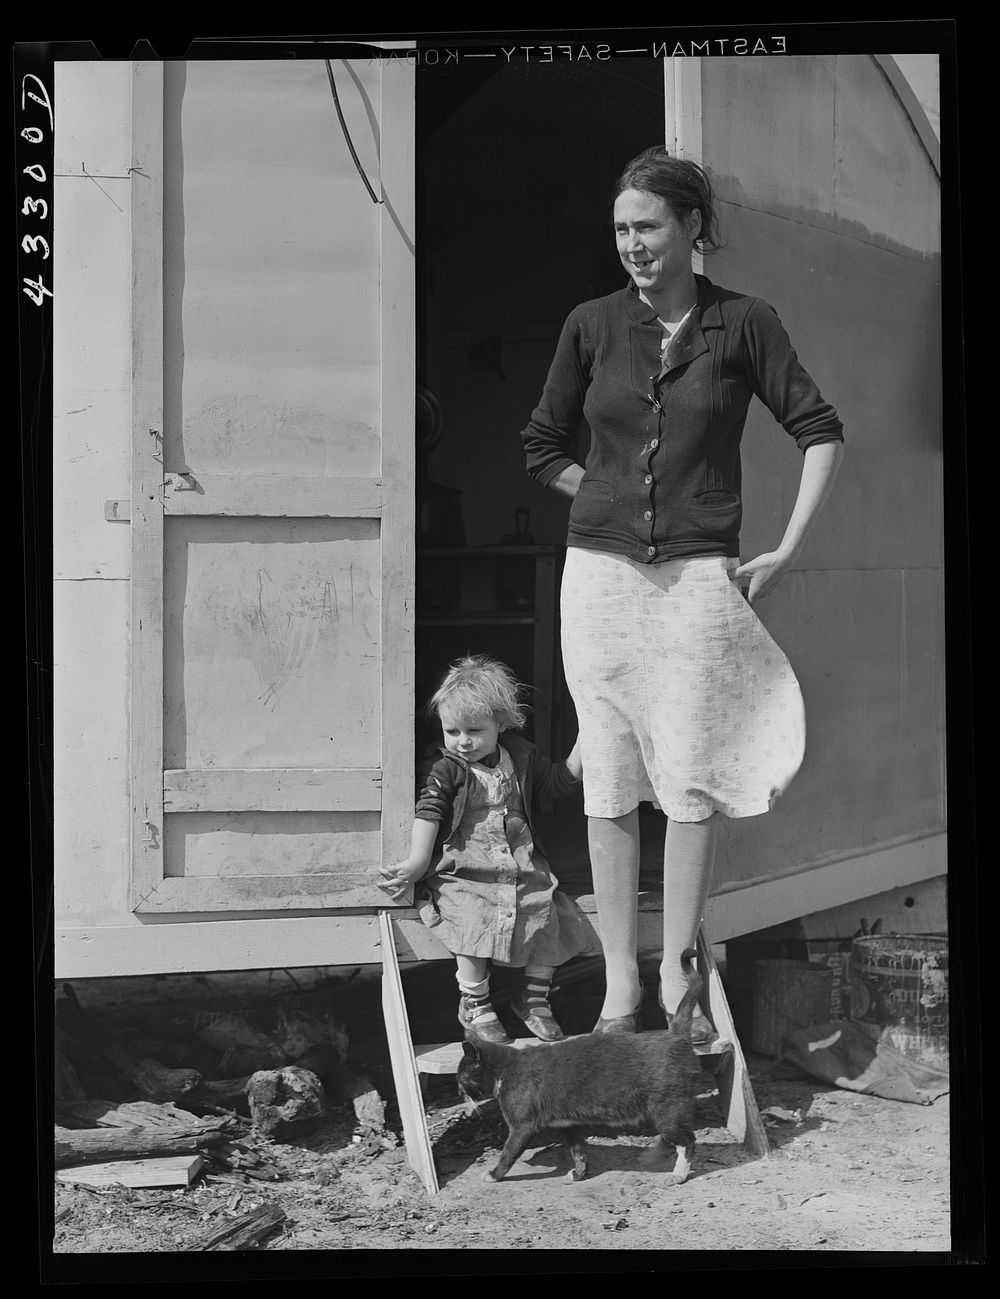 [Untitled photo, possibly related to: Her husband works at Fort Bragg, and expects to be laid off any day. They come from…